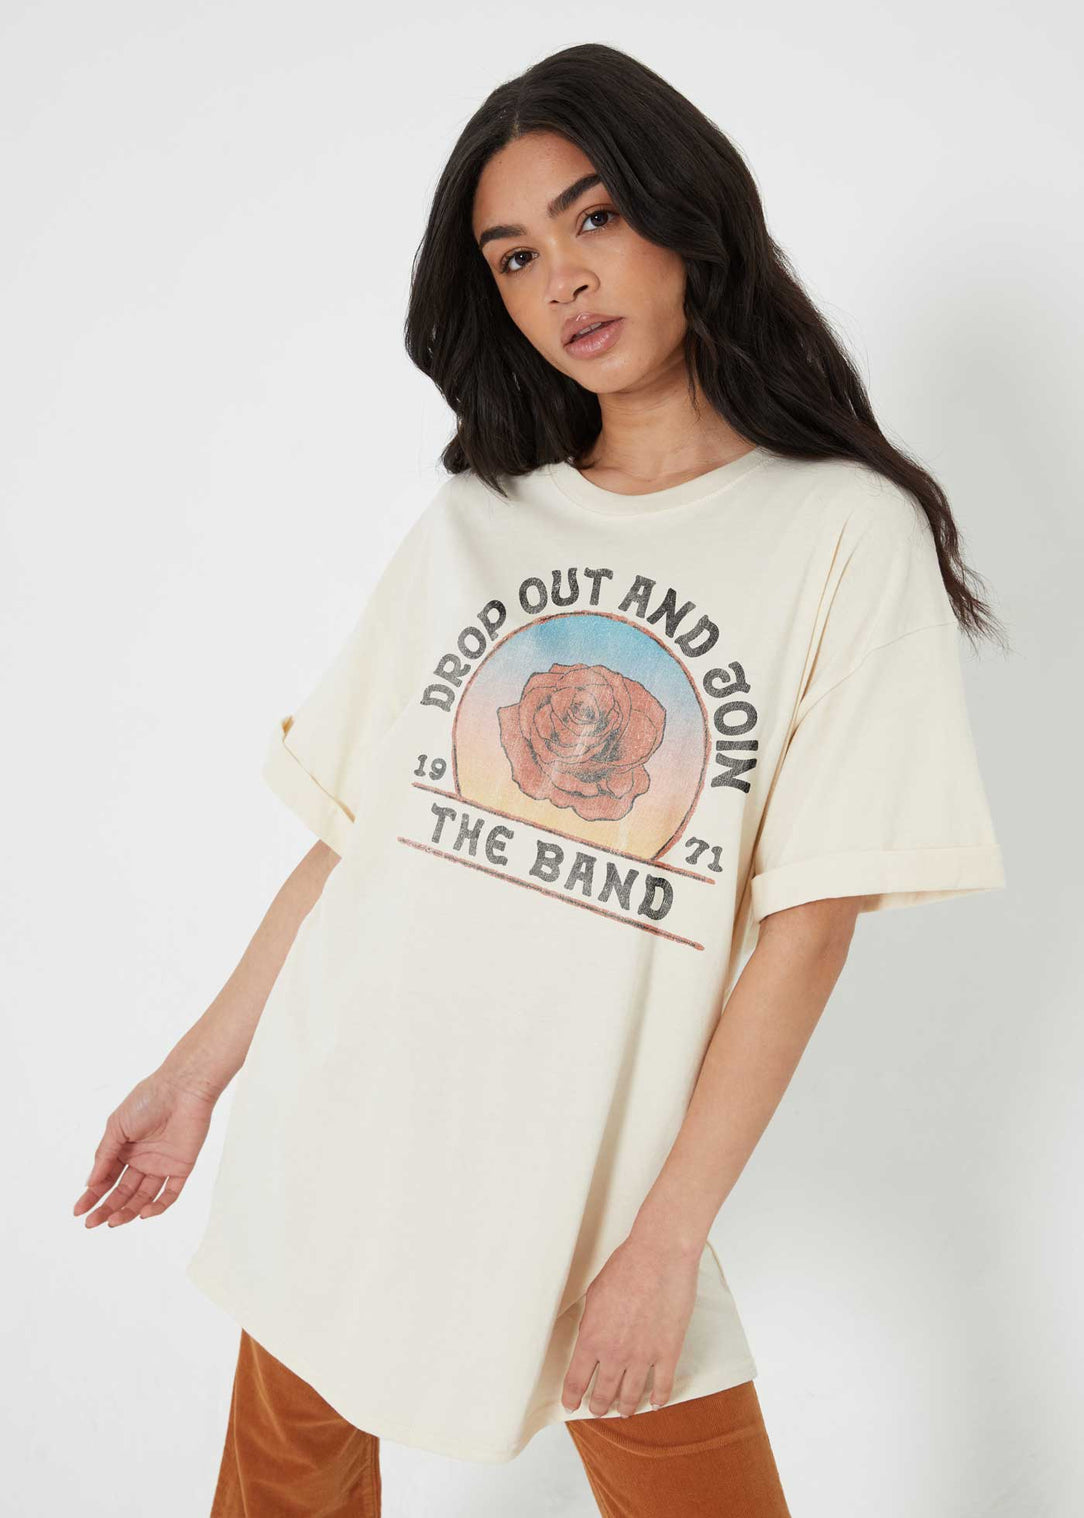 Drop Out and Join the Band Off-White Tee Dress